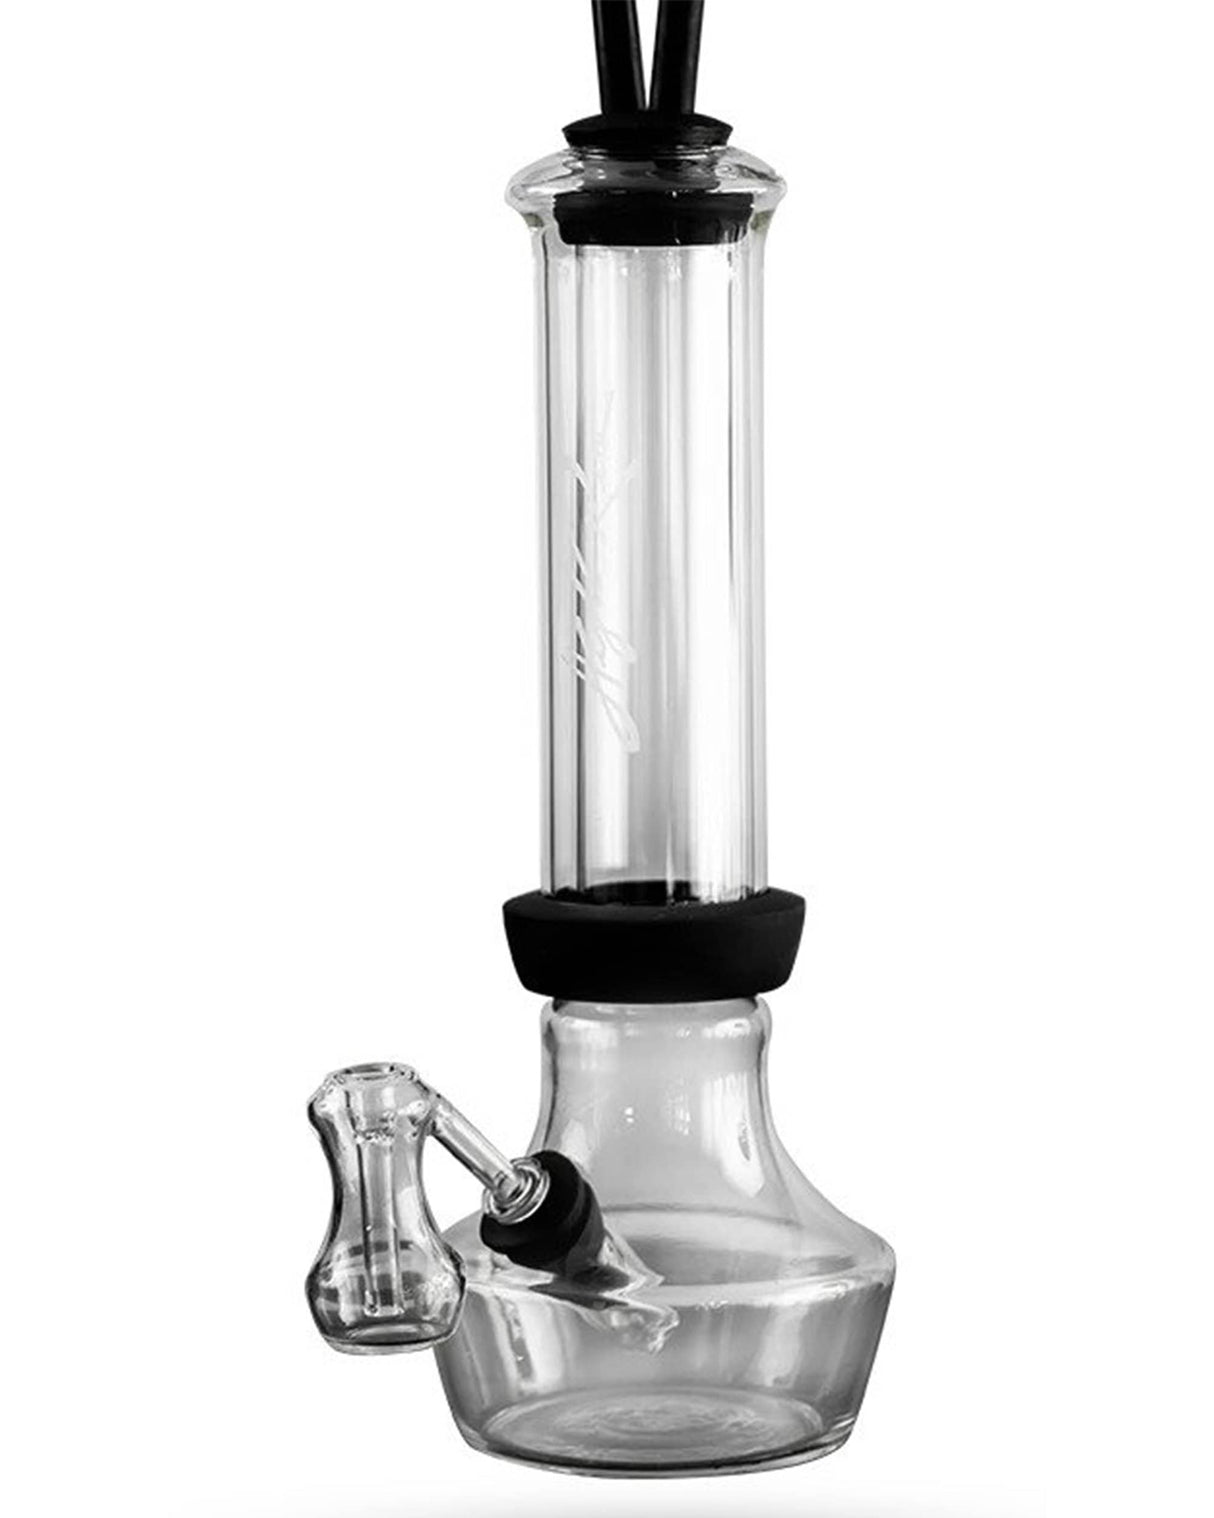 High Rise Gravity Bong by HighRise in clear borosilicate glass, beaker design with silicone base, front view